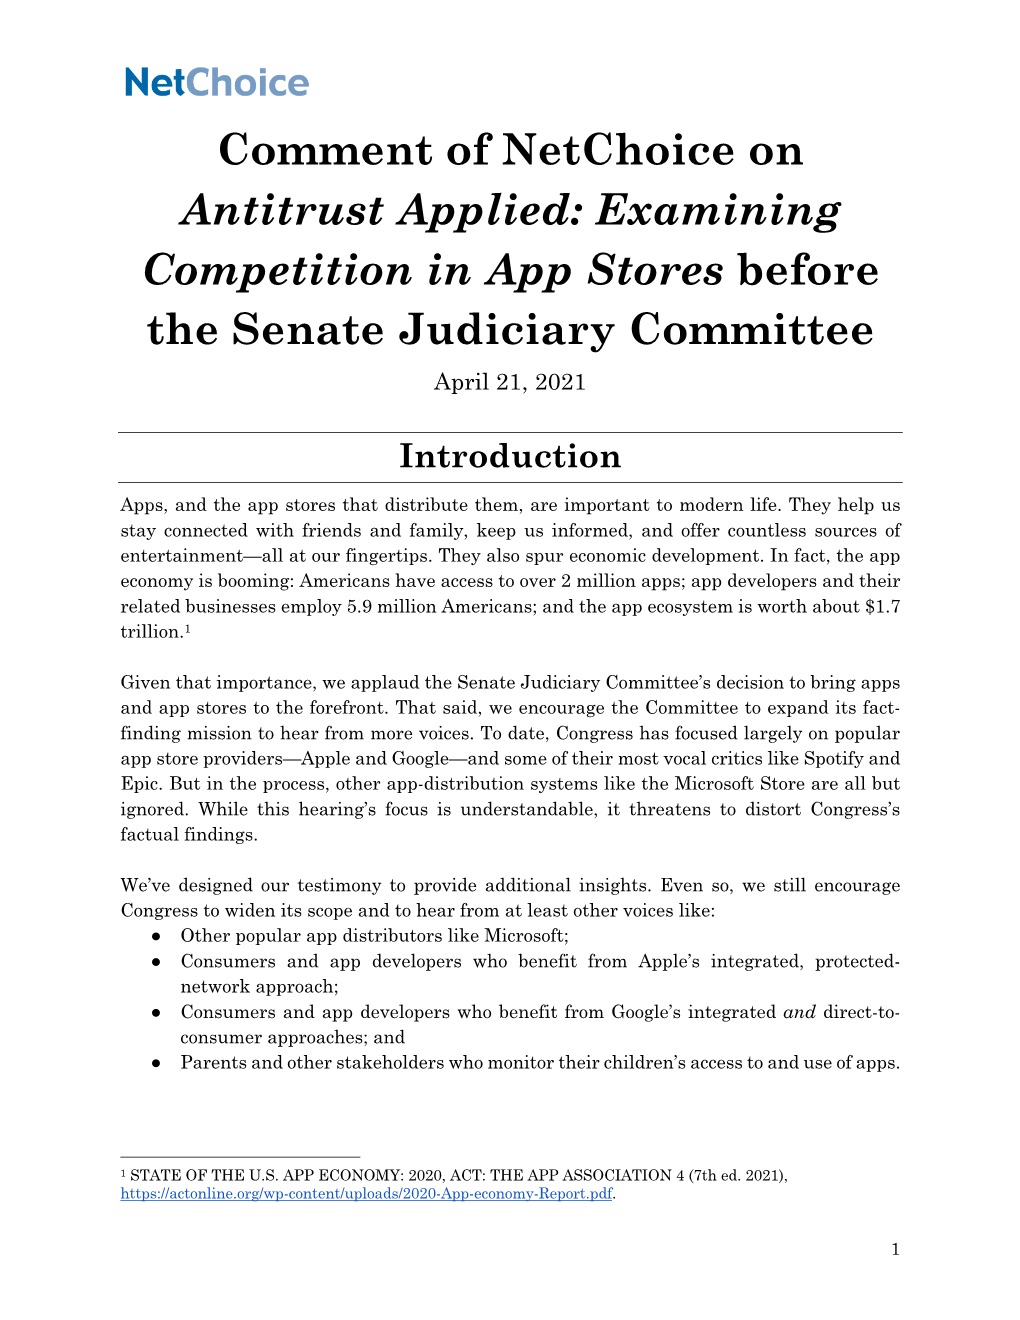 Examining Competition in App Stores Before the Senate Judiciary Committee April 21, 2021